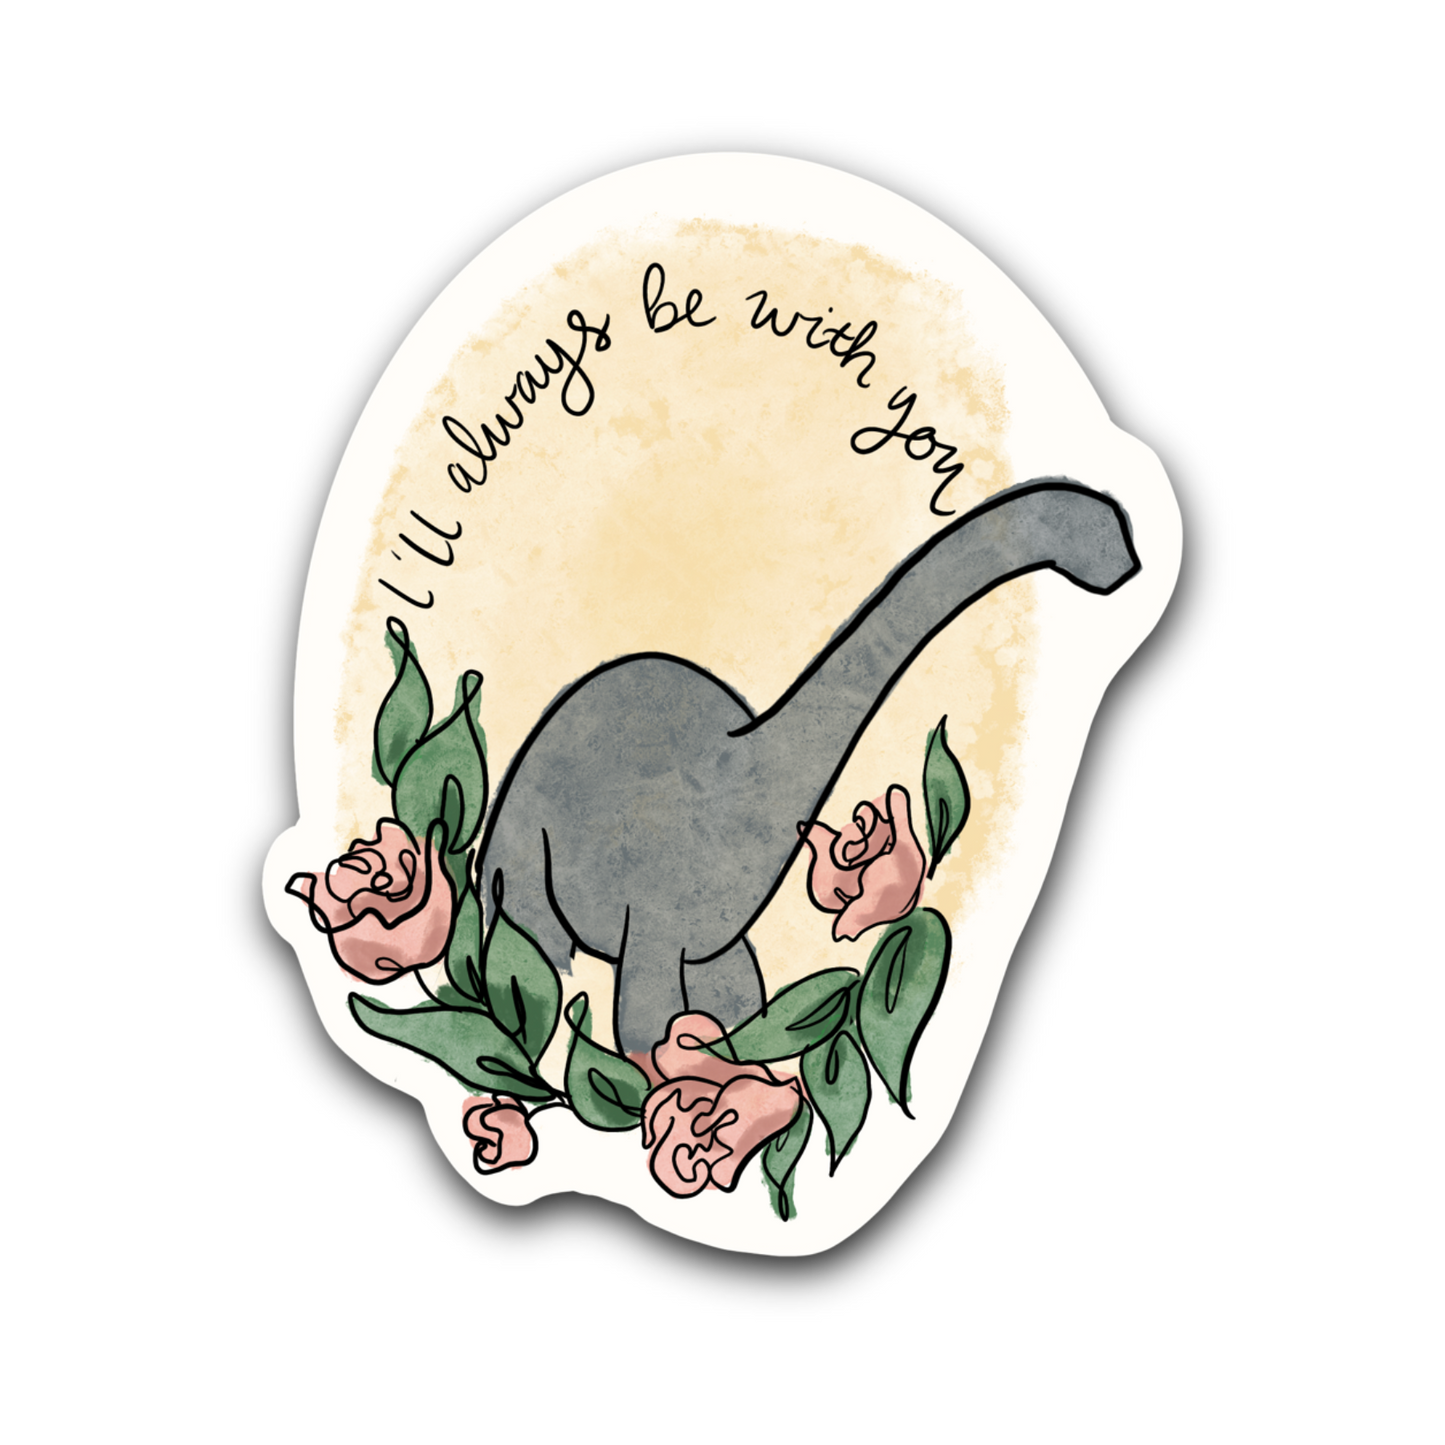 Longneck - I'll Always be with You -  Bubble free sticker